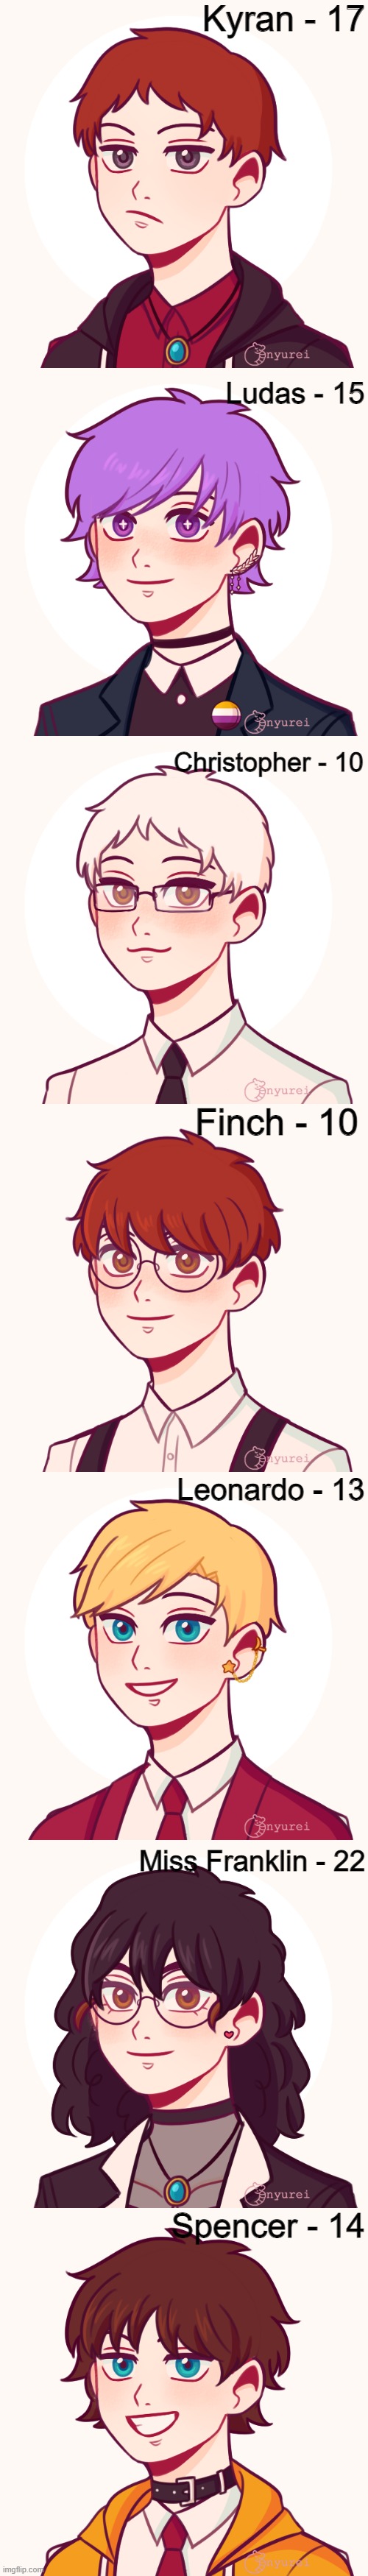 Story character dump cause why not (also im totally in love with Finch lol) | Kyran - 17; Ludas - 15; Christopher - 10; Finch - 10; Leonardo - 13; Miss Franklin - 22; Spencer - 14 | made w/ Imgflip meme maker